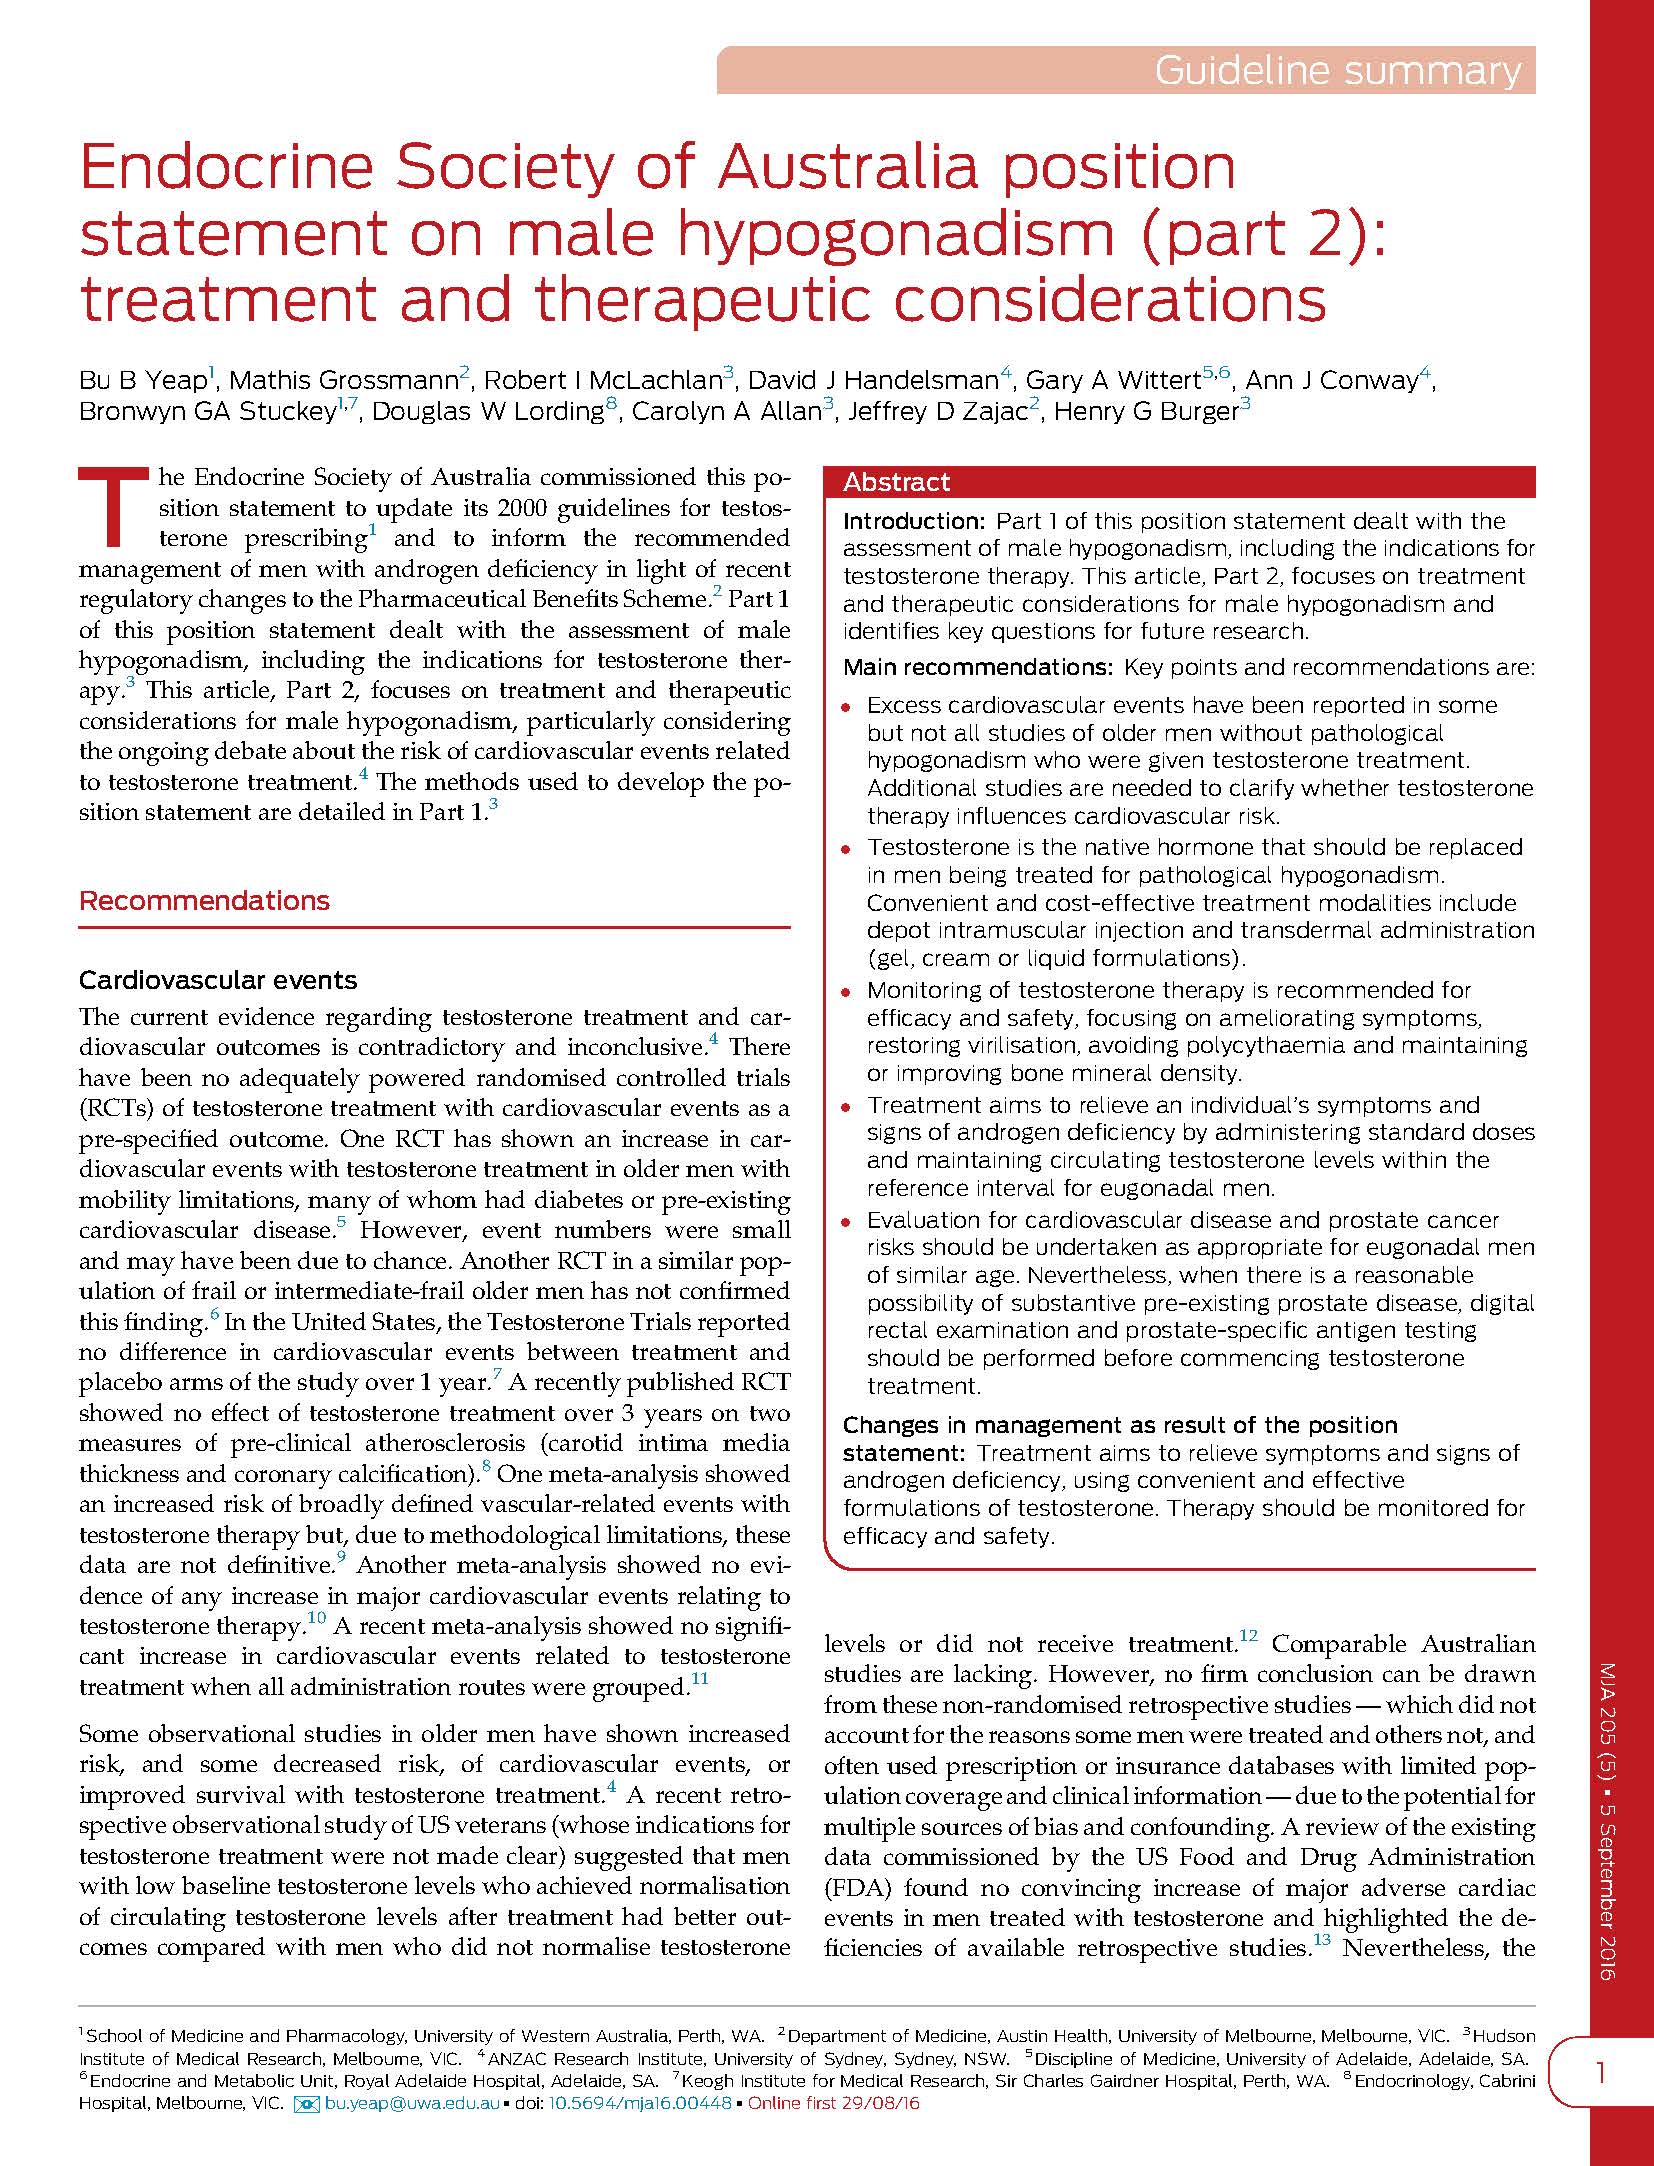 Endocrine Society of Australia position statement on male hypogonadism (part 2): treatment and therapeutic considerations